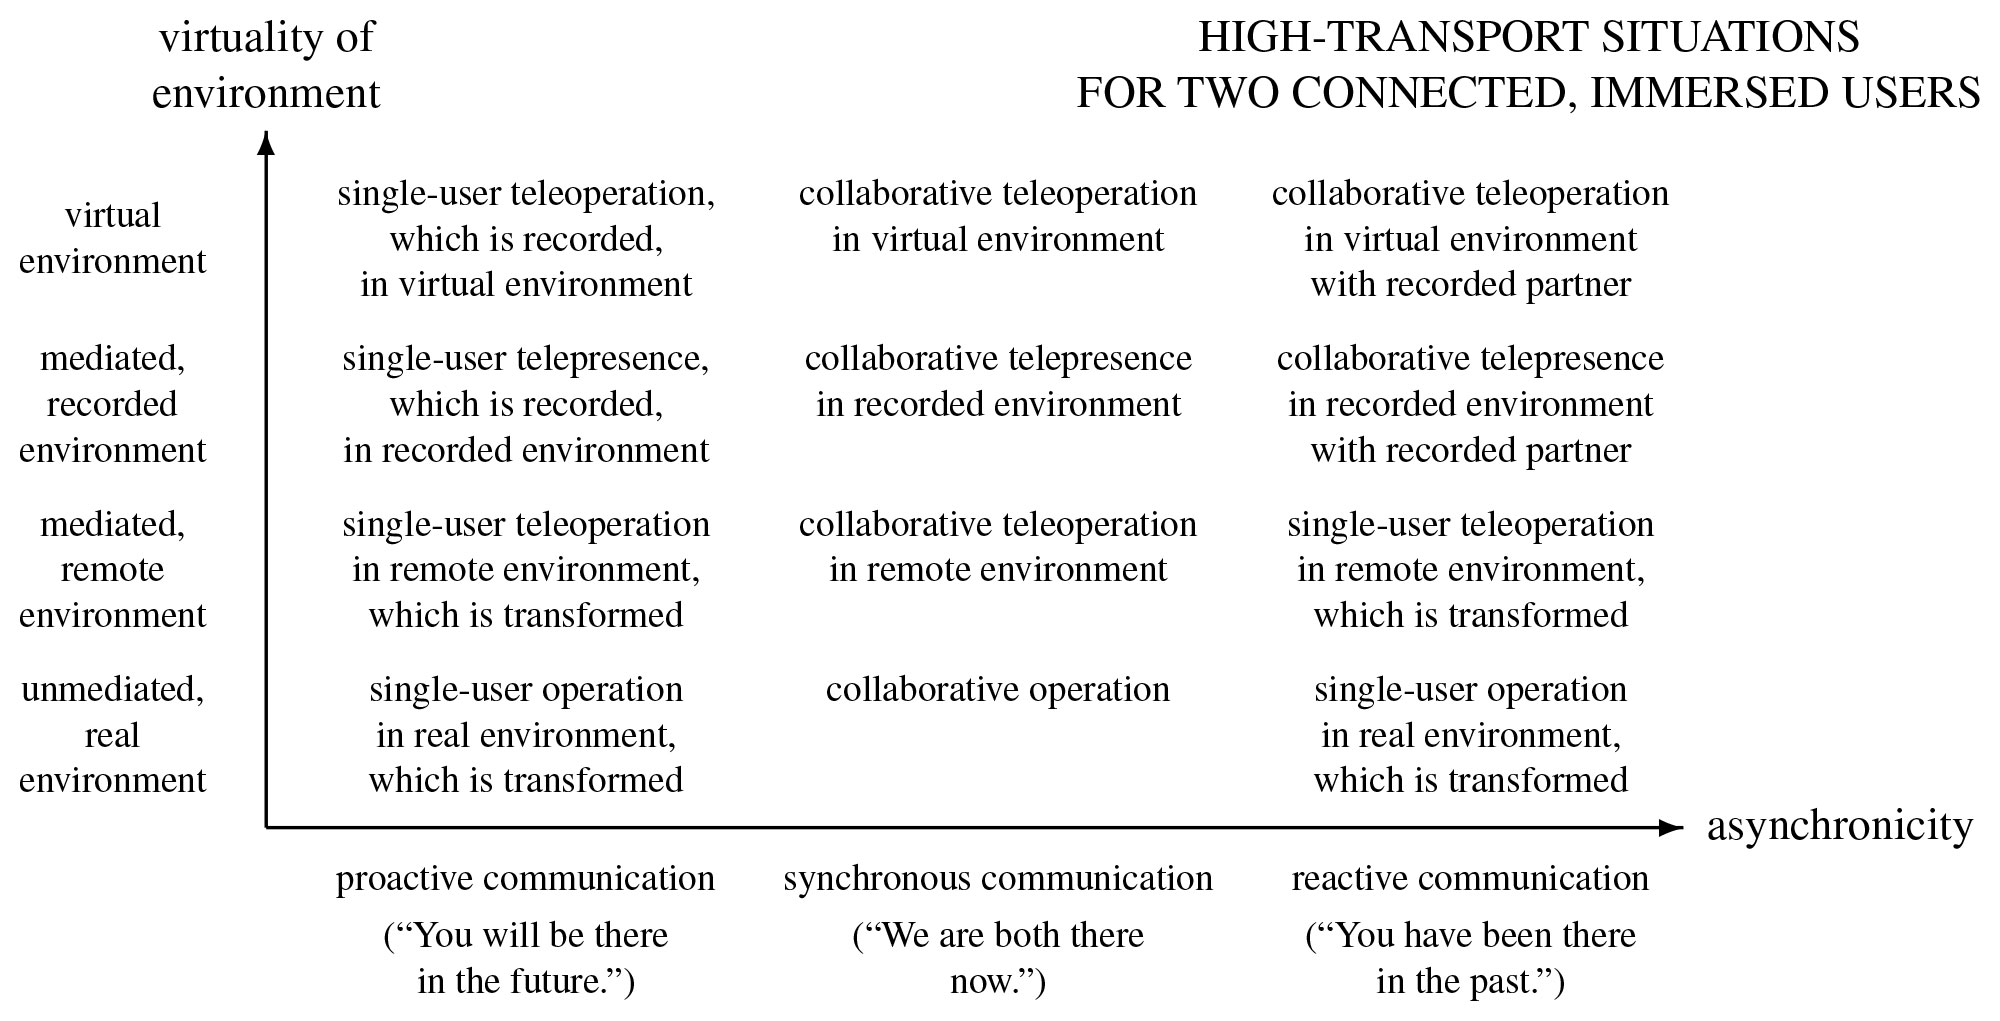 The dimensions of asynchronicity (horizontal) and virtuality (vertical) of our classification for high-transport situations for two connected, immersed users. The row labeled "unmediated, real environment" is an extension for real environments.